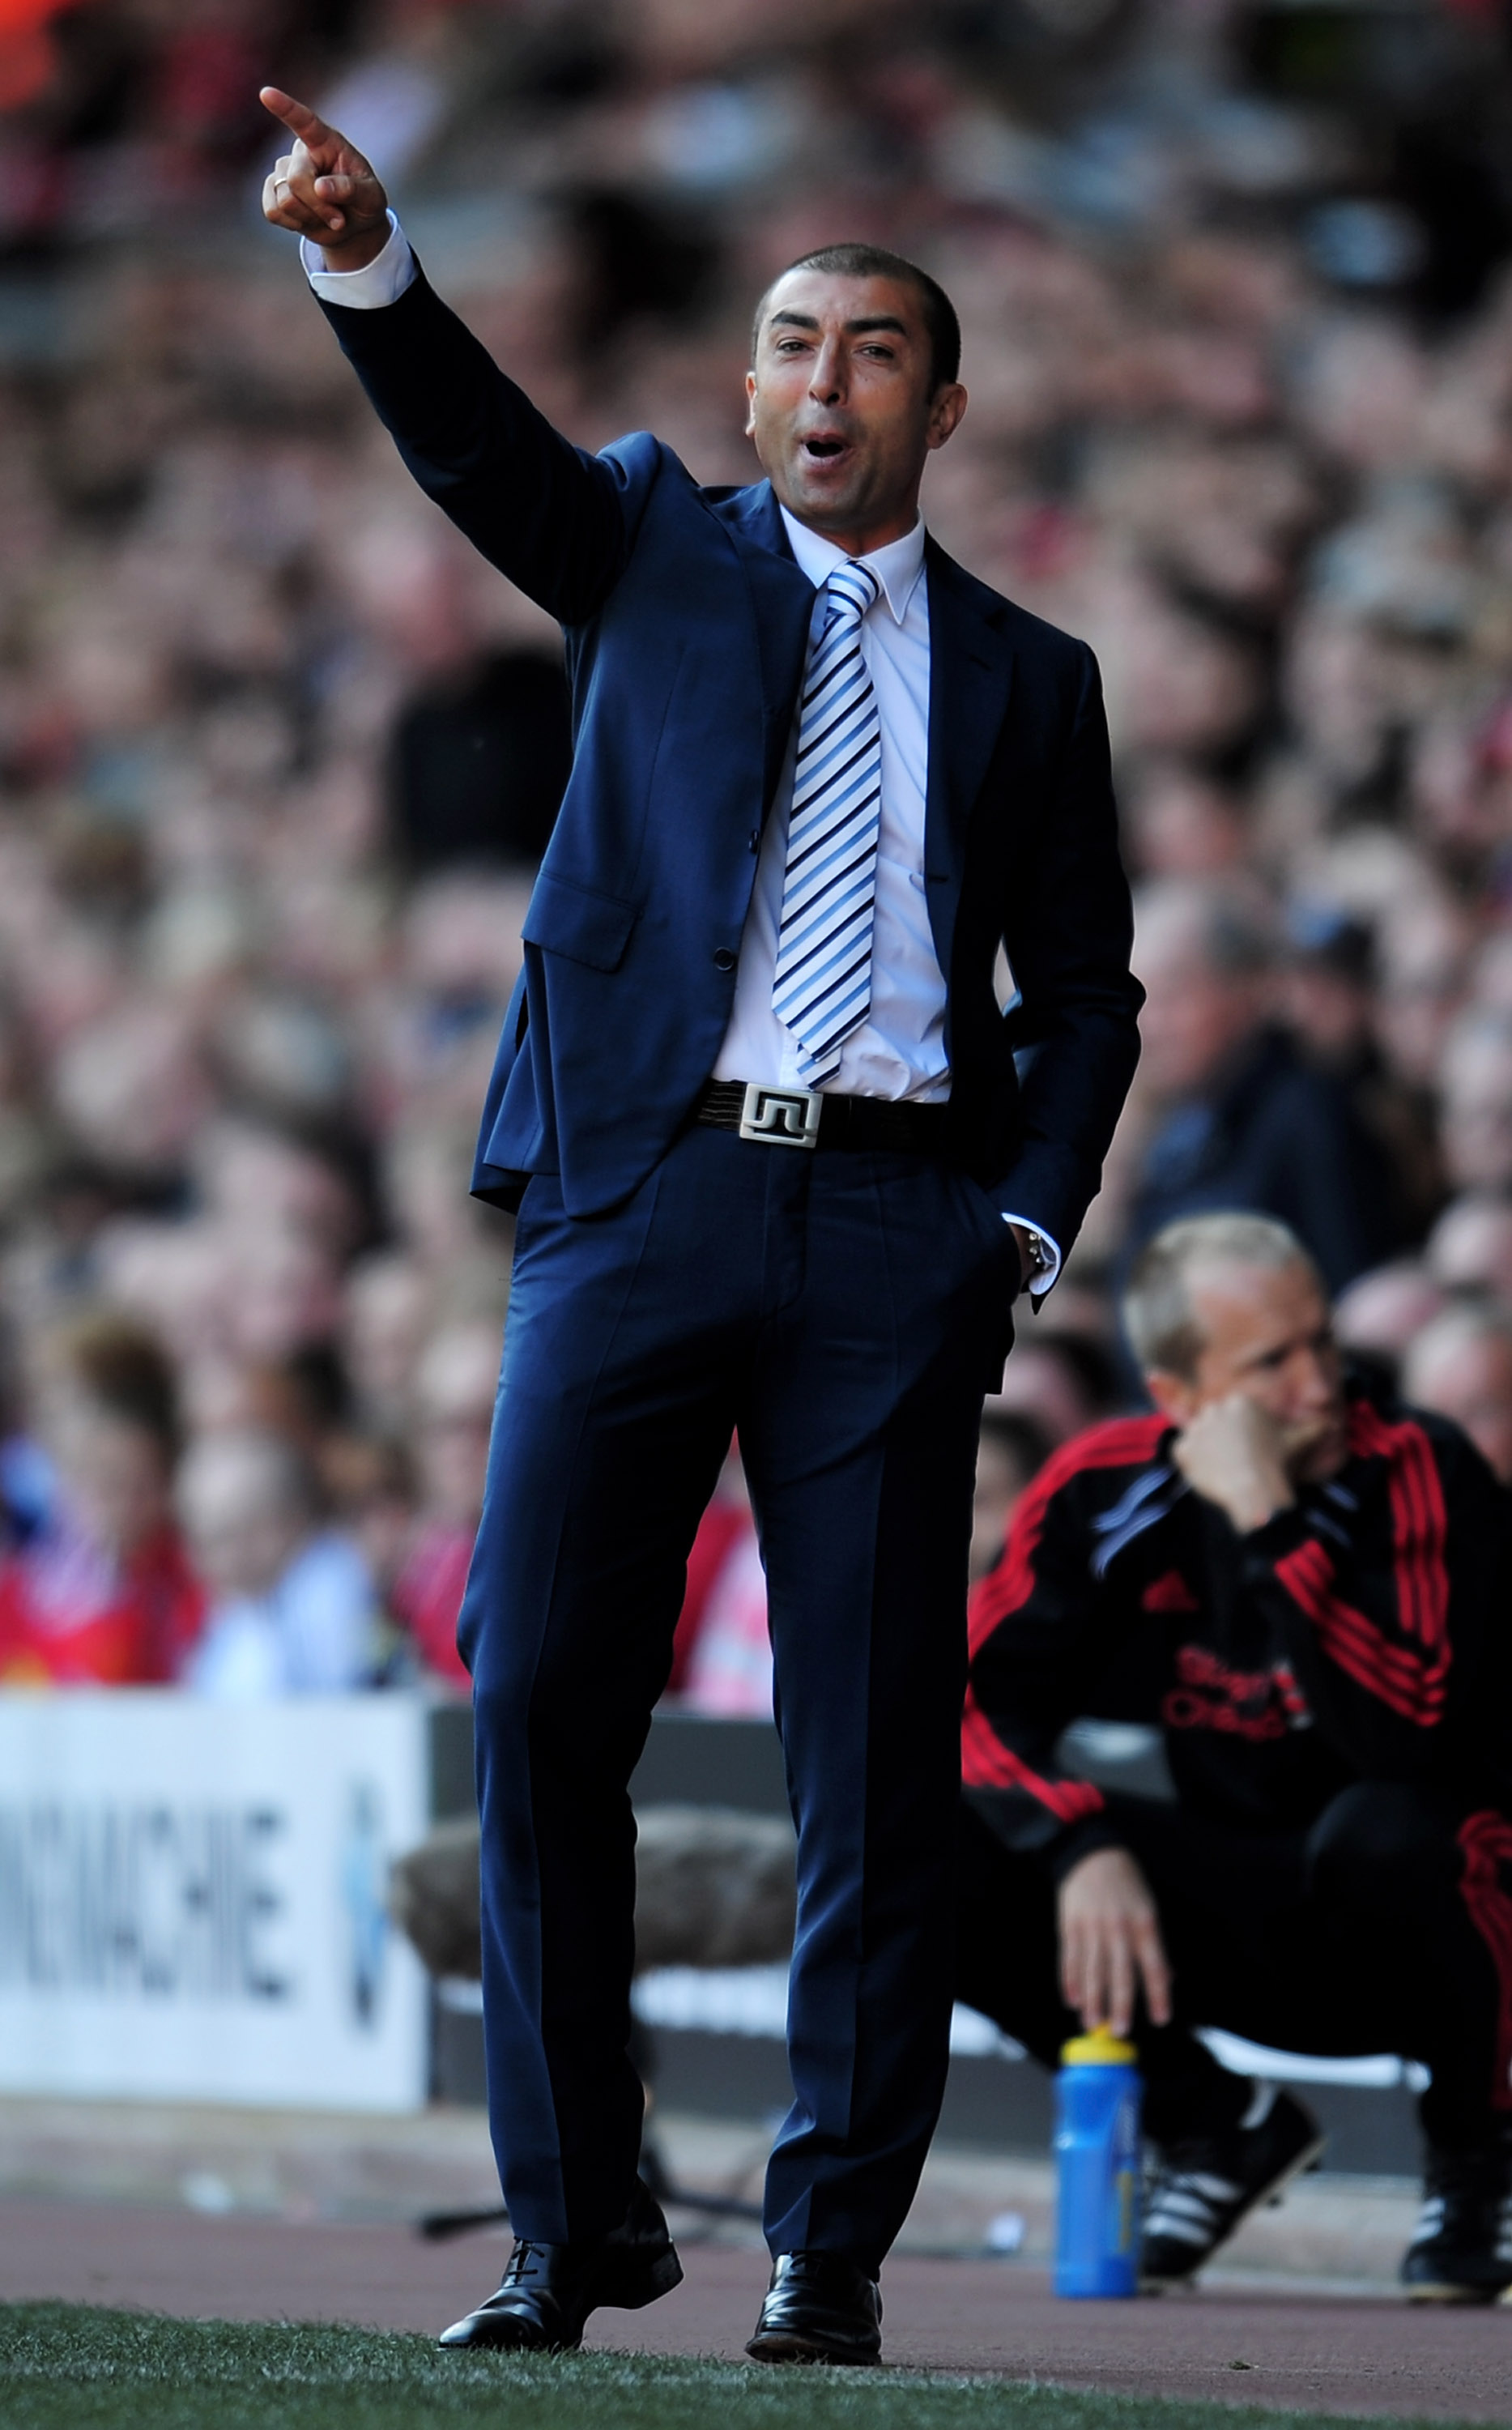 LIVERPOOL, ENGLAND - AUGUST 29:  West Bromwich Albion Manager Roberto Di Matteo issues instructions during the Barclays Premier League match between Liverpool and West Bromwich Albion at Anfield on August 29, 2010 in Liverpool, England.  (Photo by Shaun B